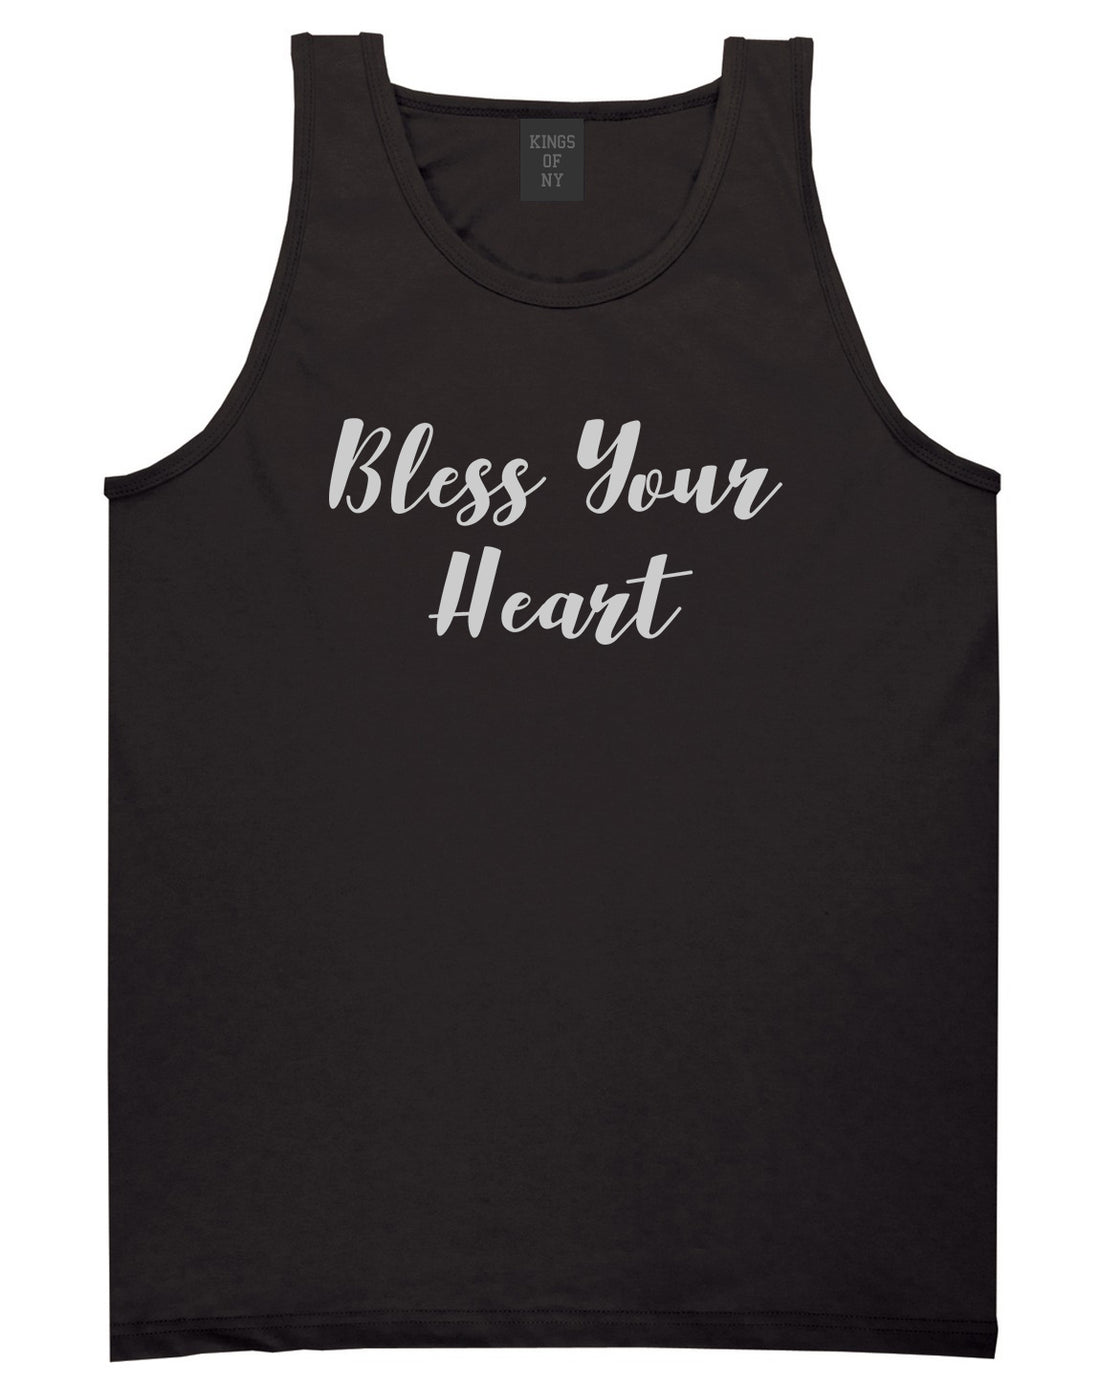 Bless Your Heart Black Tank Top Shirt by Kings Of NY